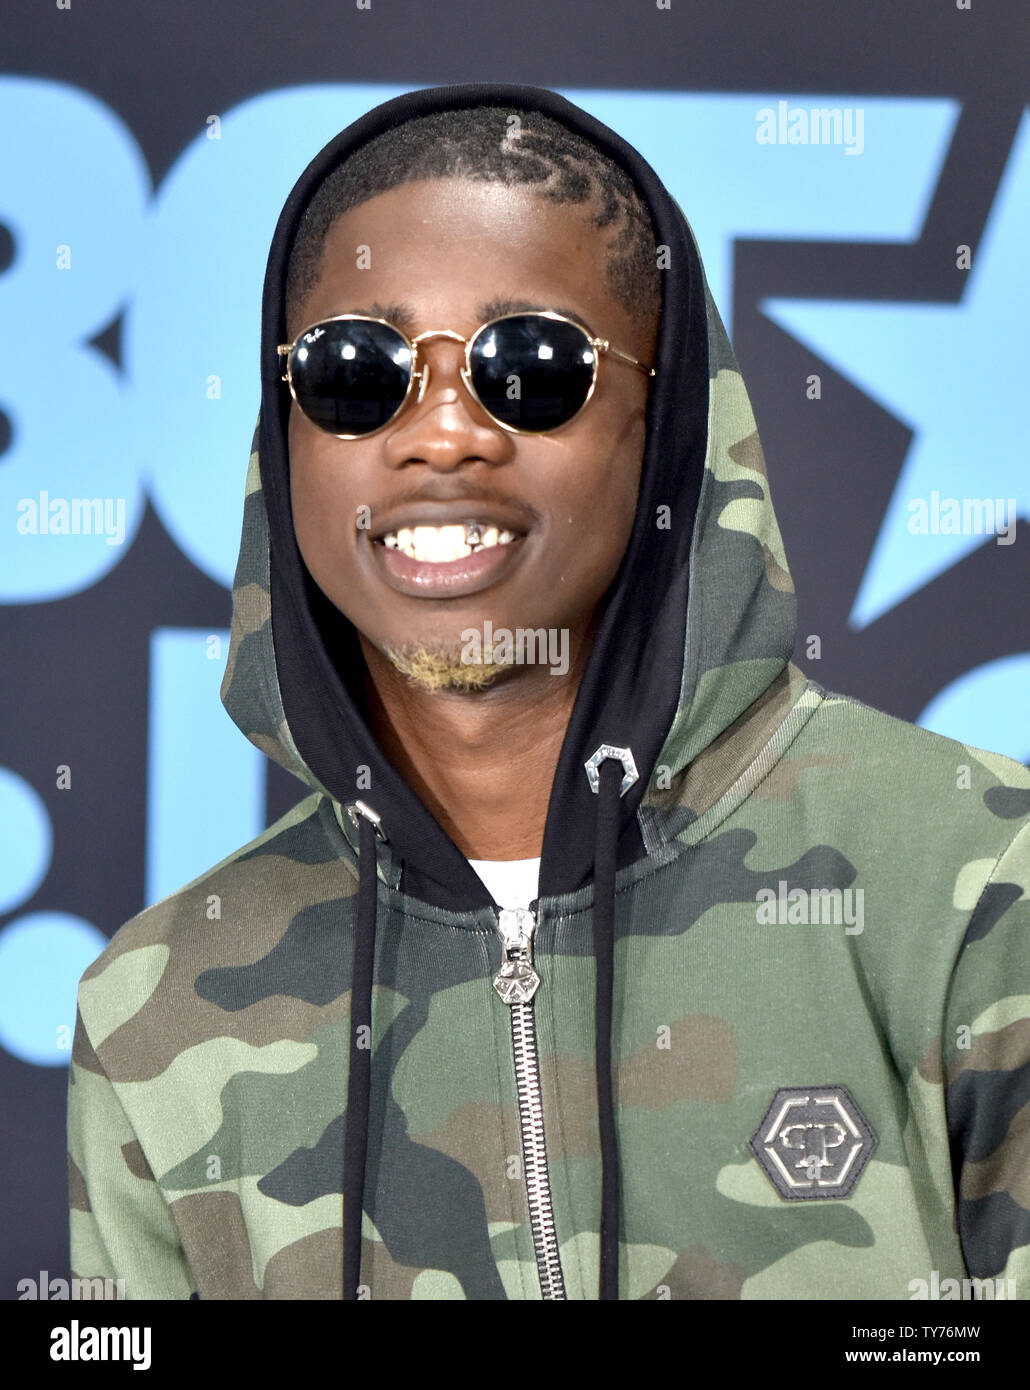 Rapper MHD attends the 17th annual BET Awards at Microsoft Theater